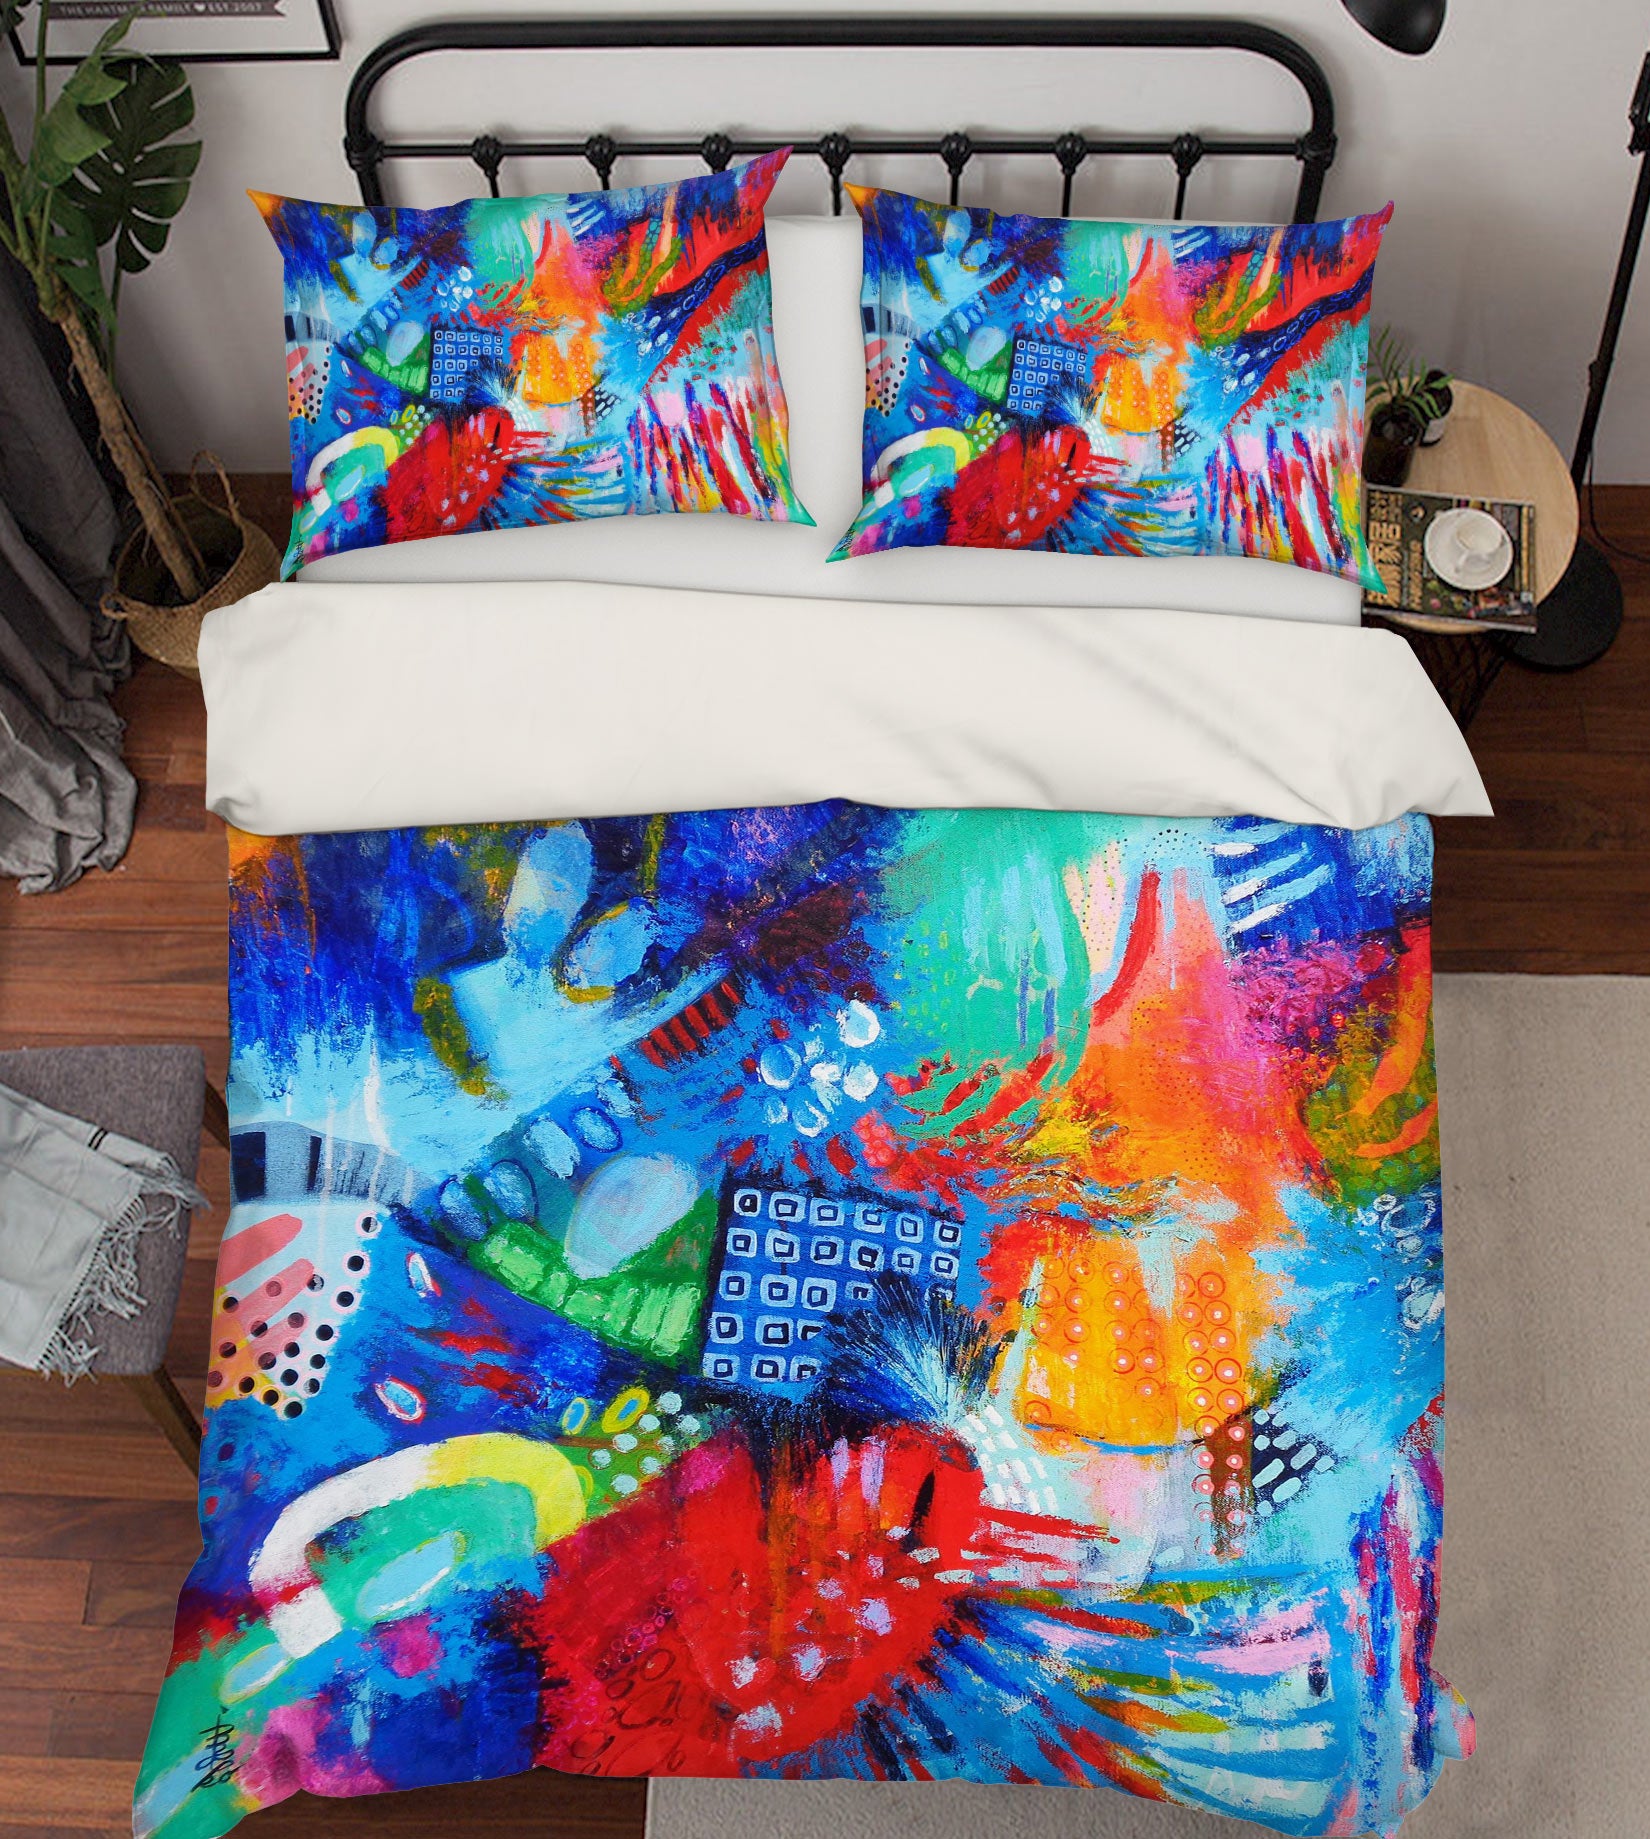 3D Painted Painting 1189 Misako Chida Bedding Bed Pillowcases Quilt Cover Duvet Cover